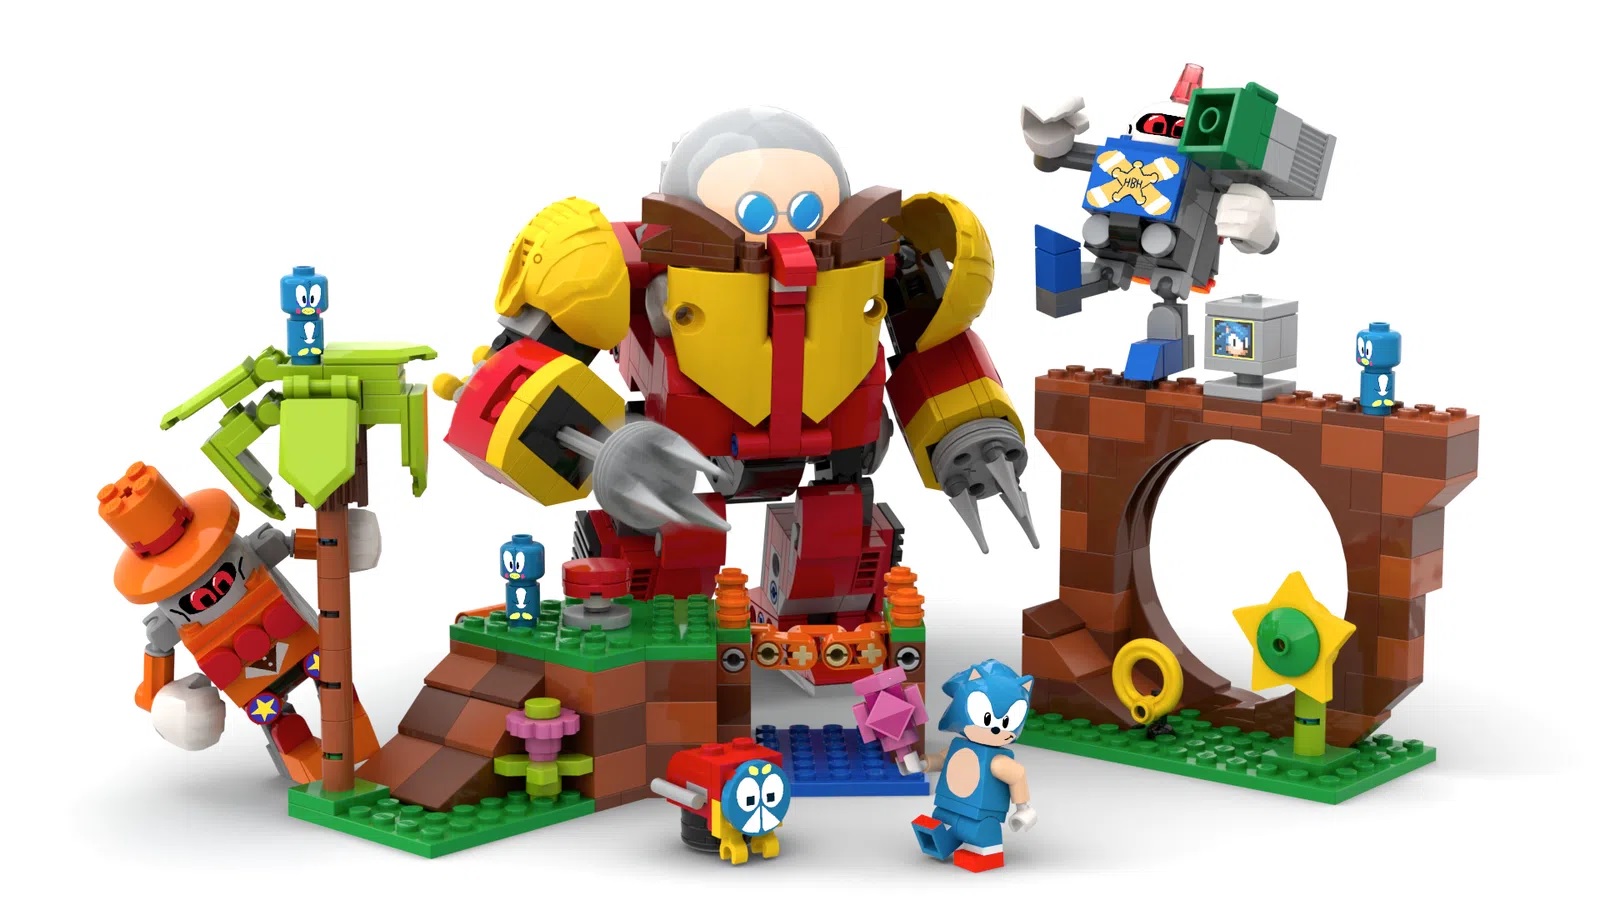 Lego is Making an Official Sonic the Hedgehog Lego Set